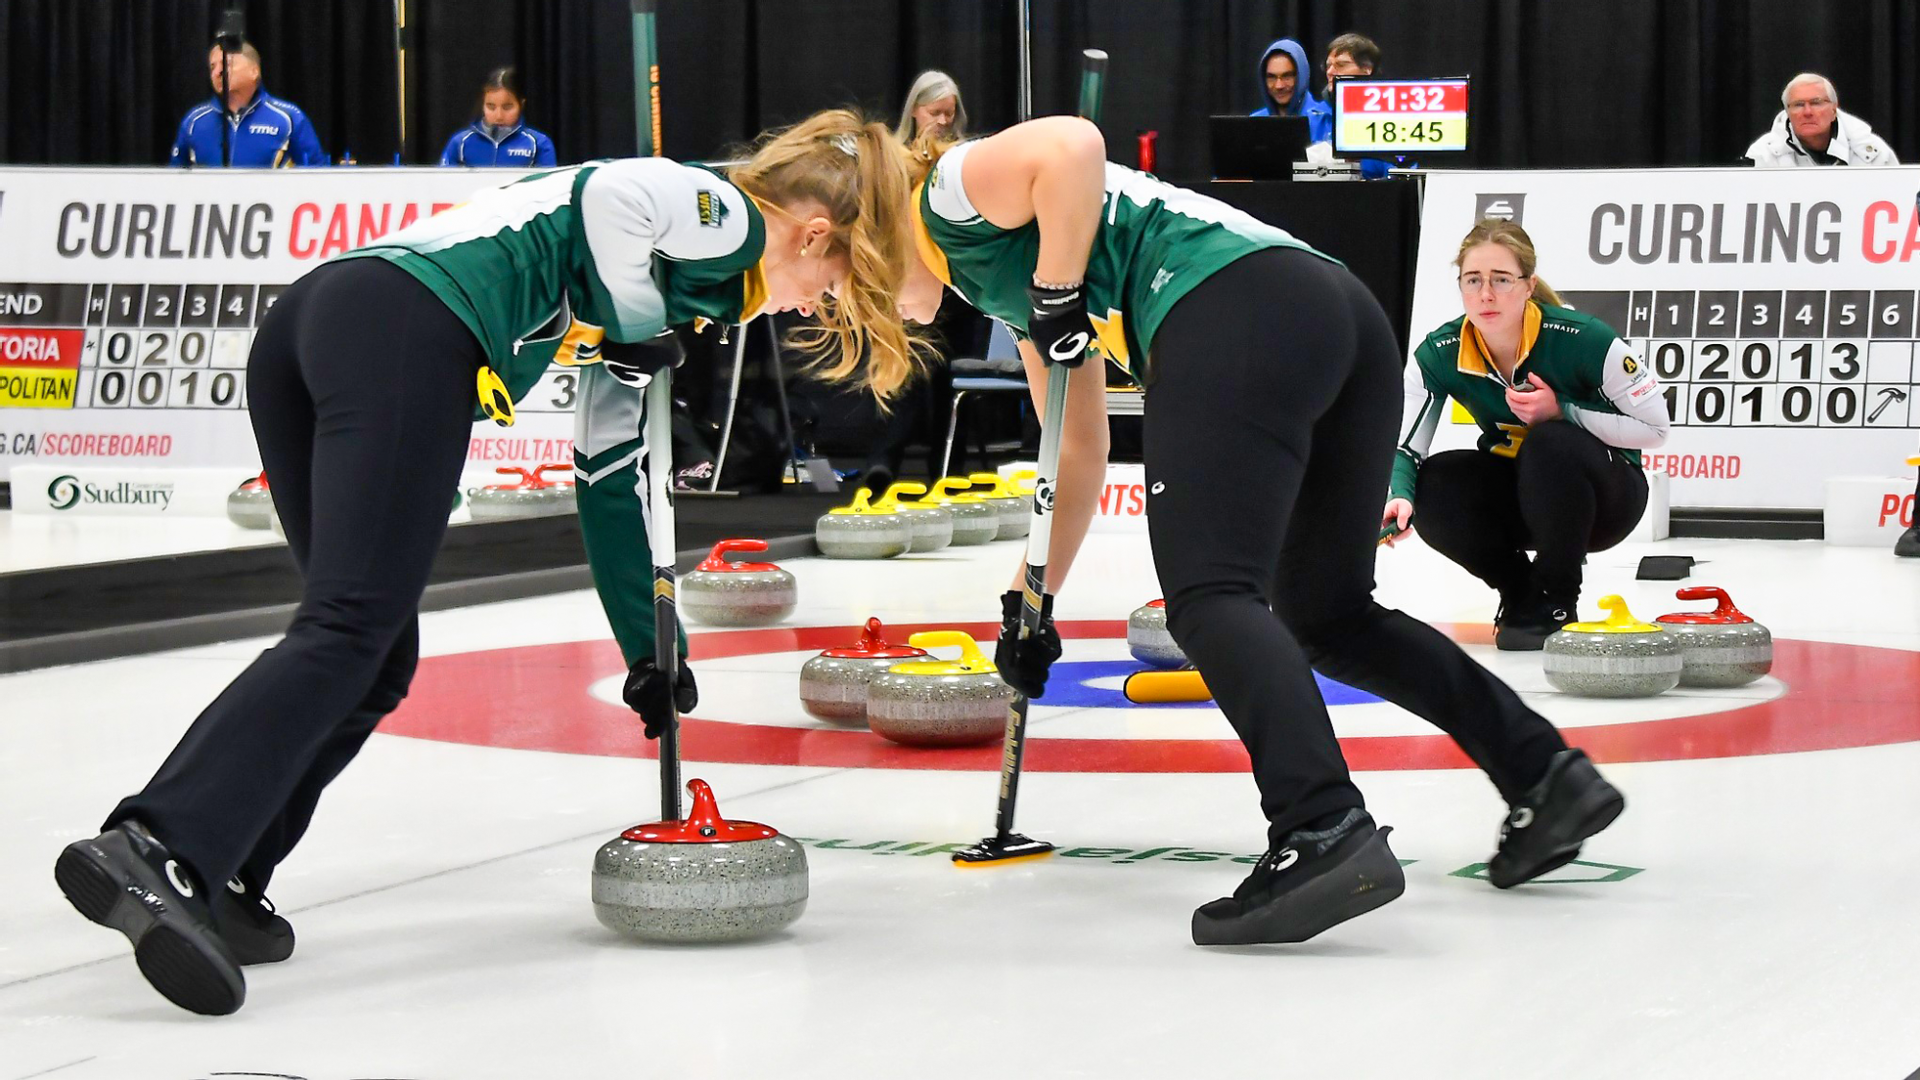 Photo of a group of female curlers